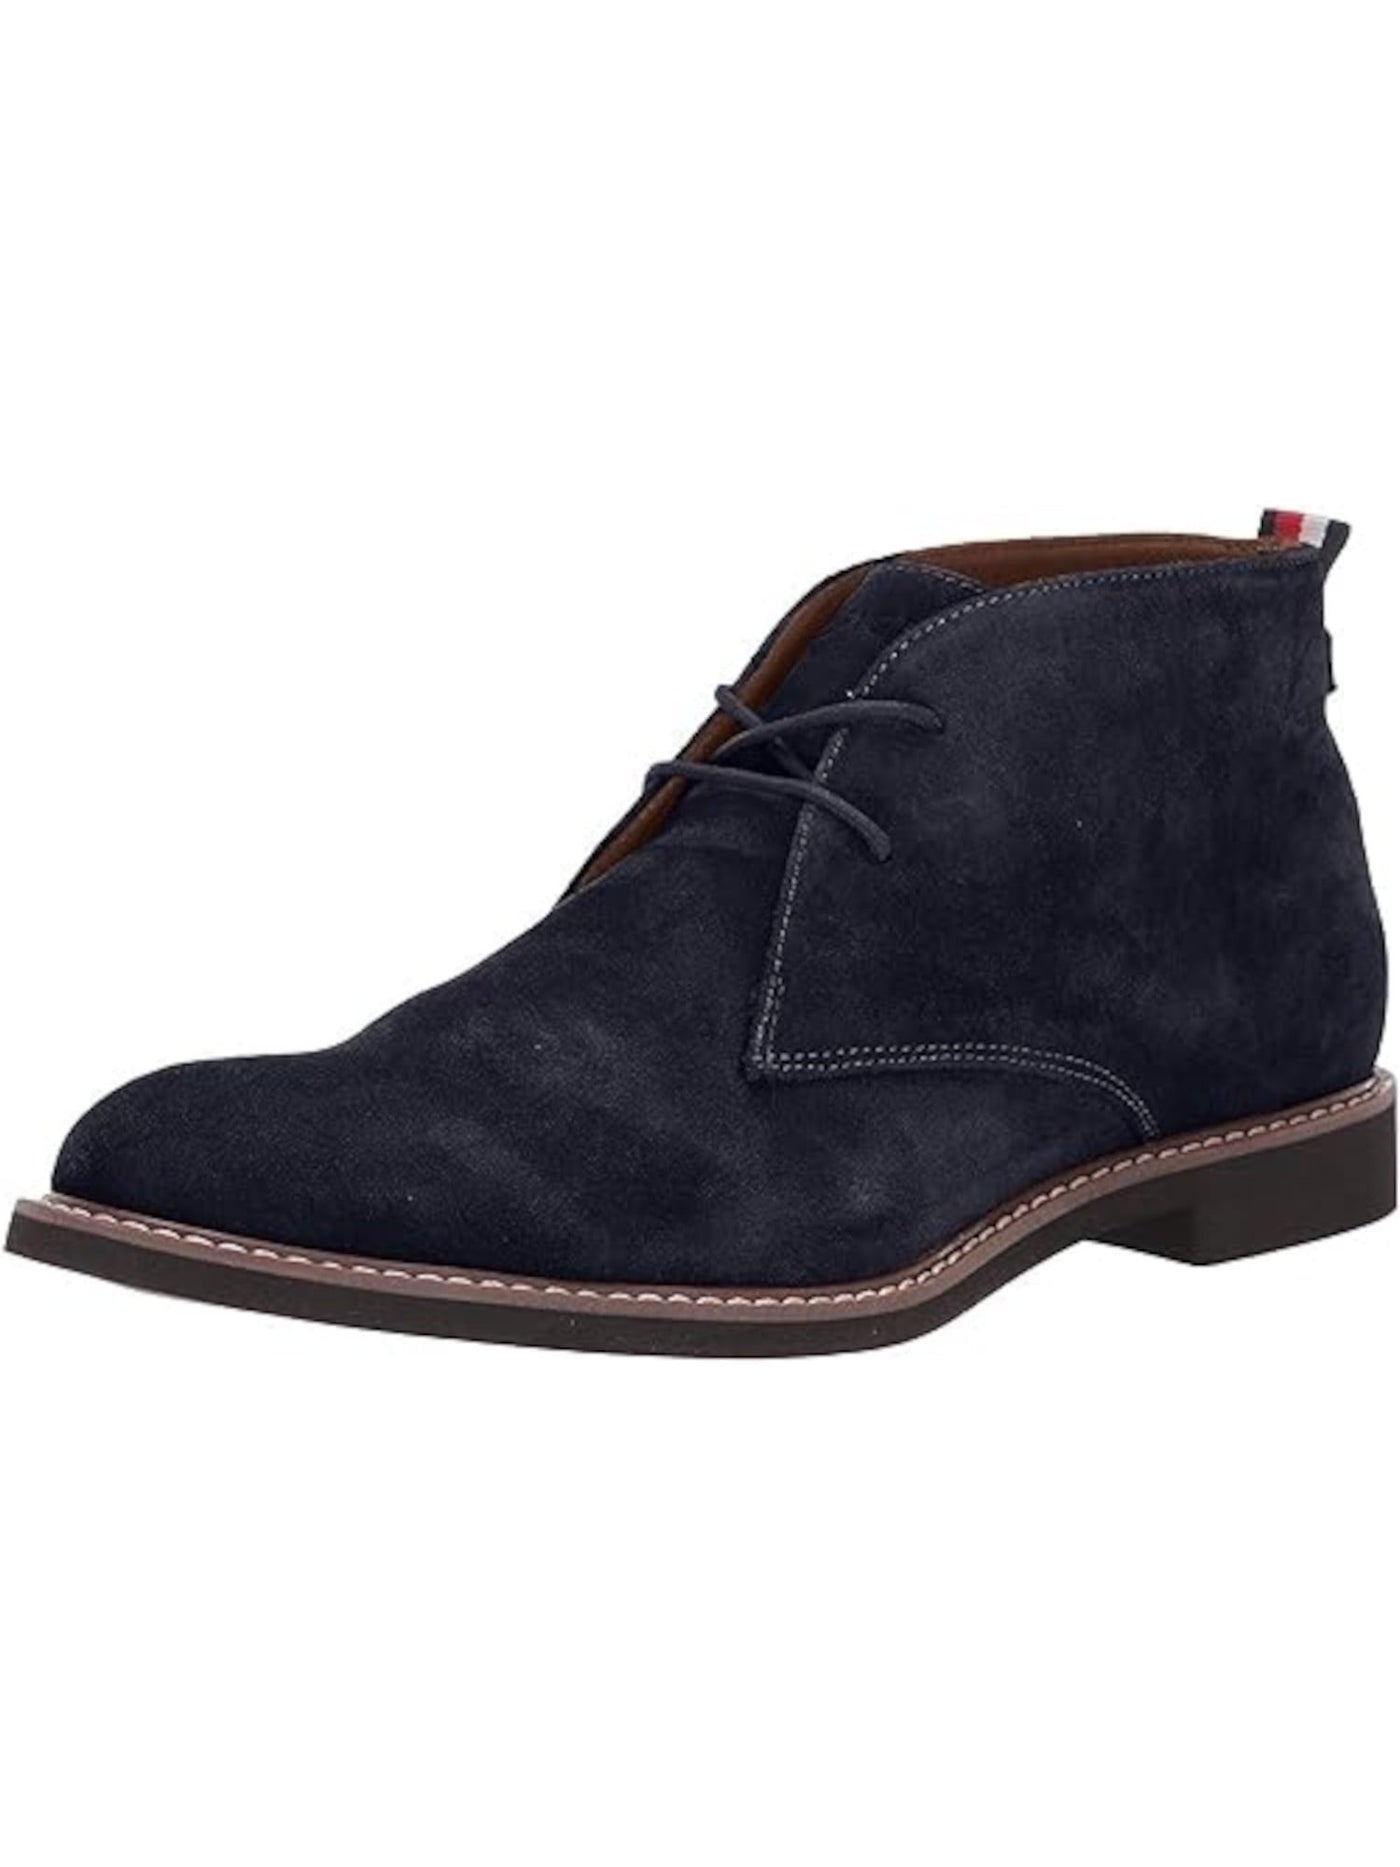 TOMMY HILFIGER Mens Navy Cushioned Lightweight Gervis Round Toe Block Heel Lace-Up Leather Chukka Boots 9 M